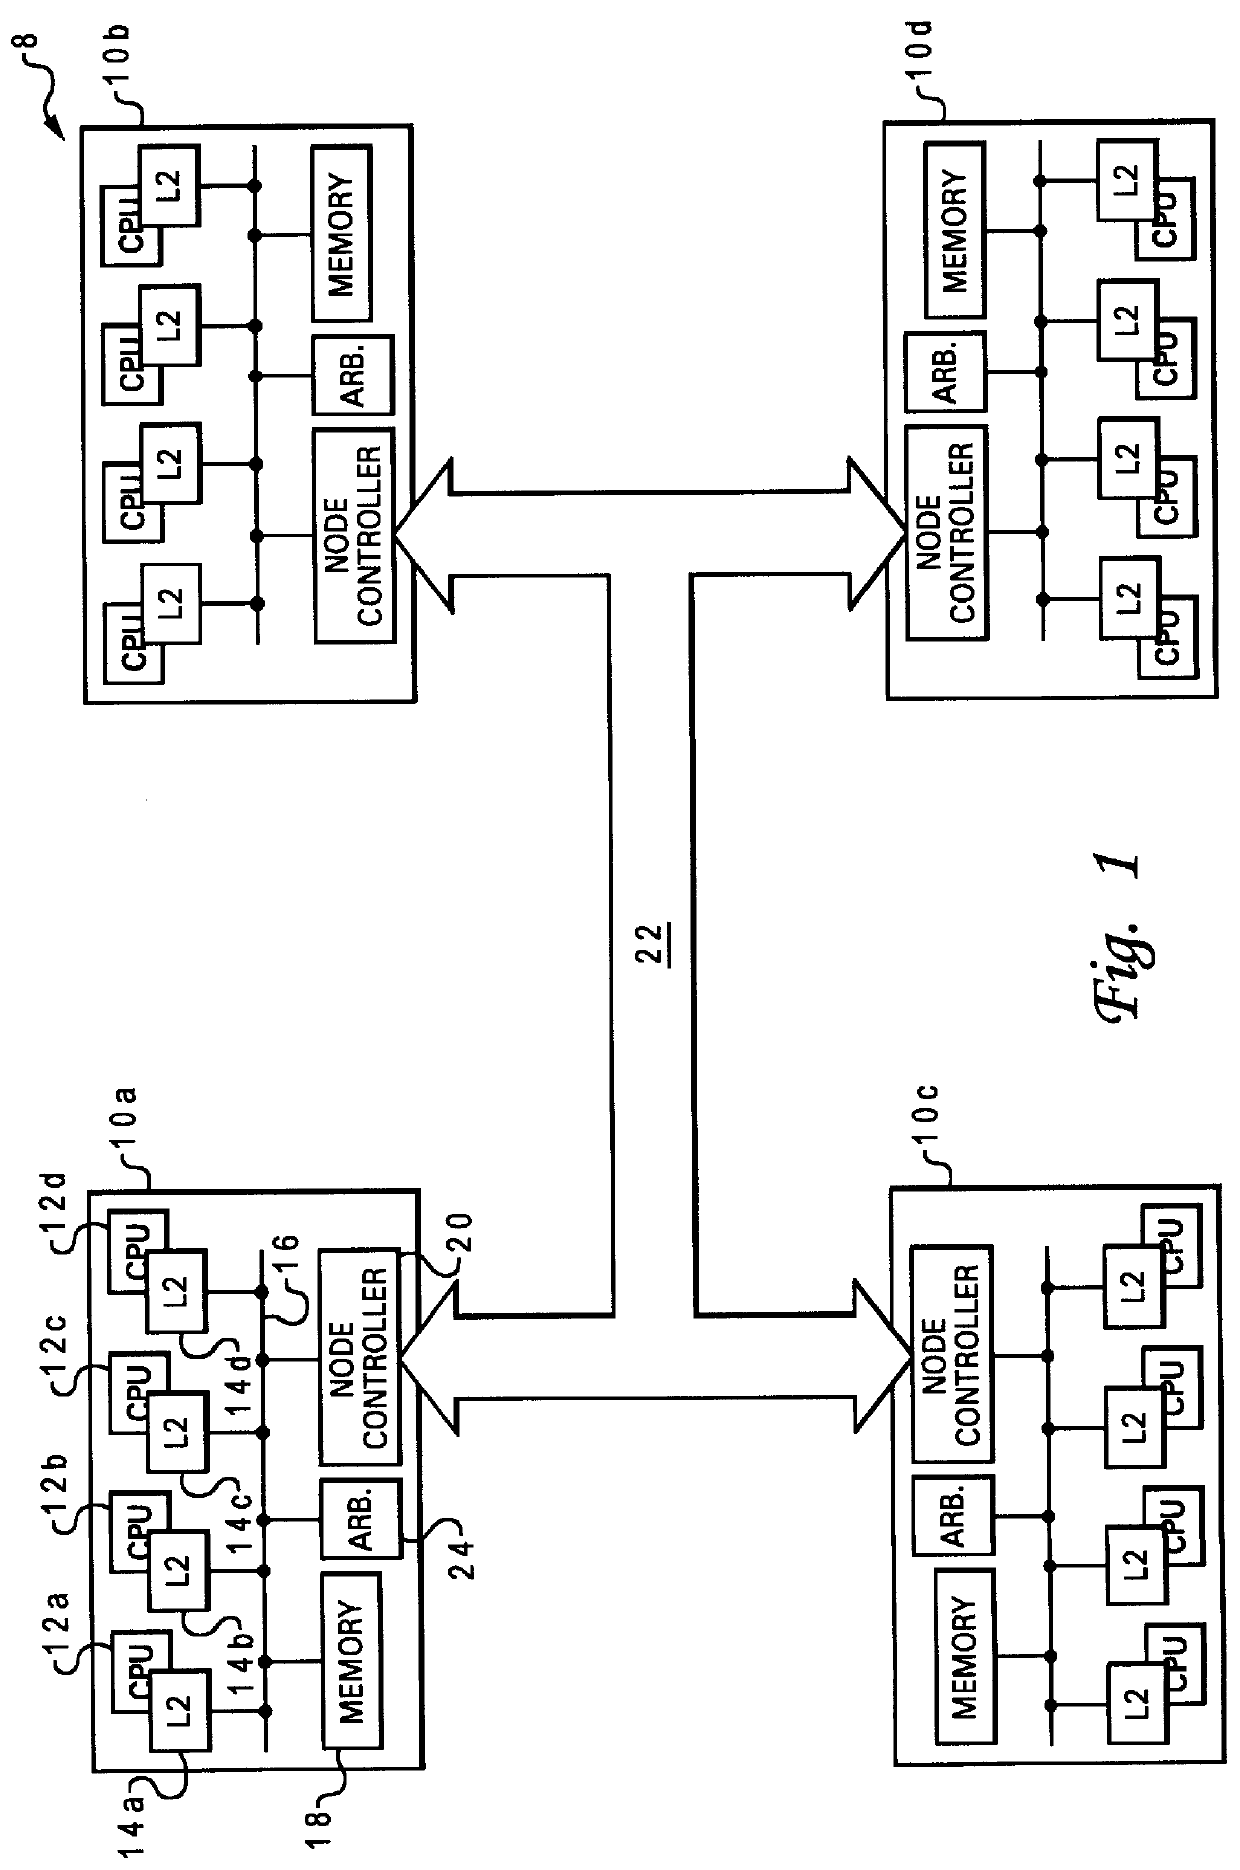 Non-uniform memory access (NUMA) data processing system that speculatively issues requests on a node interconnect